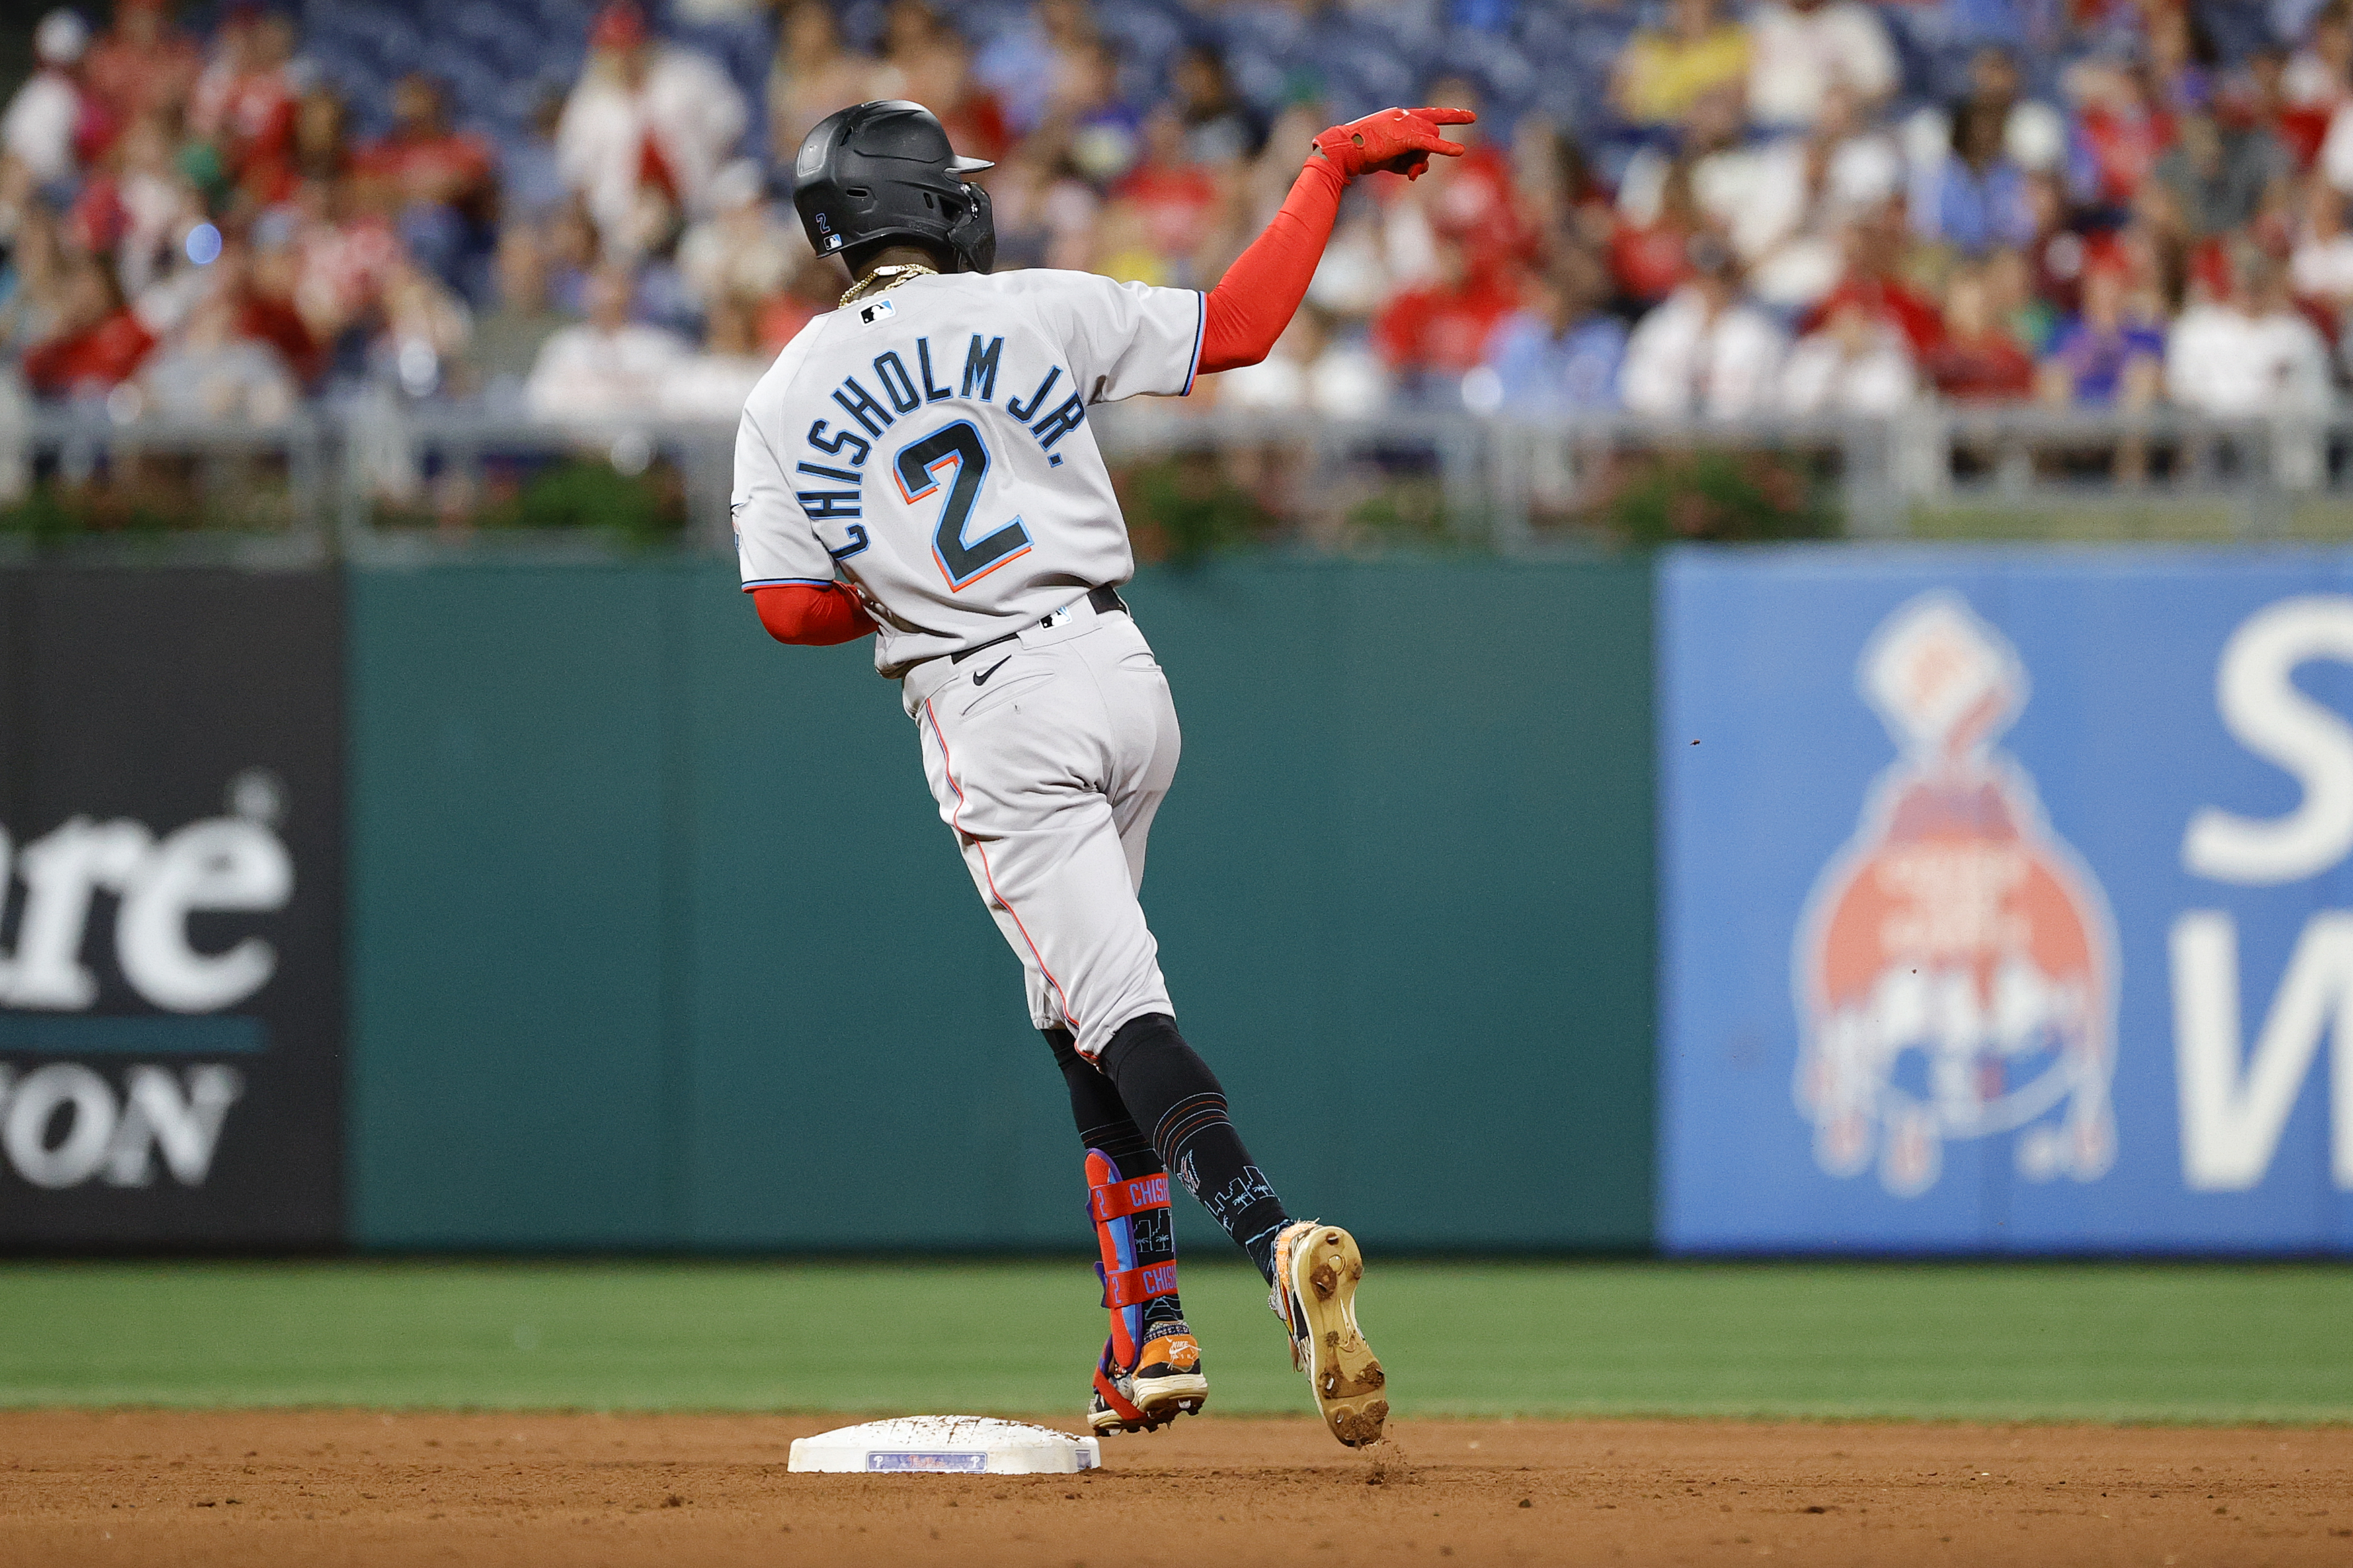 Jazz Chisholm Jr. #2 of the Miami Marlins rounds bases after hitting a solo home run during the seventh inning against the Philadelphia Phillies at Citizens Bank Park on June 14, 2022 in Philadelphia, Pennsylvania.